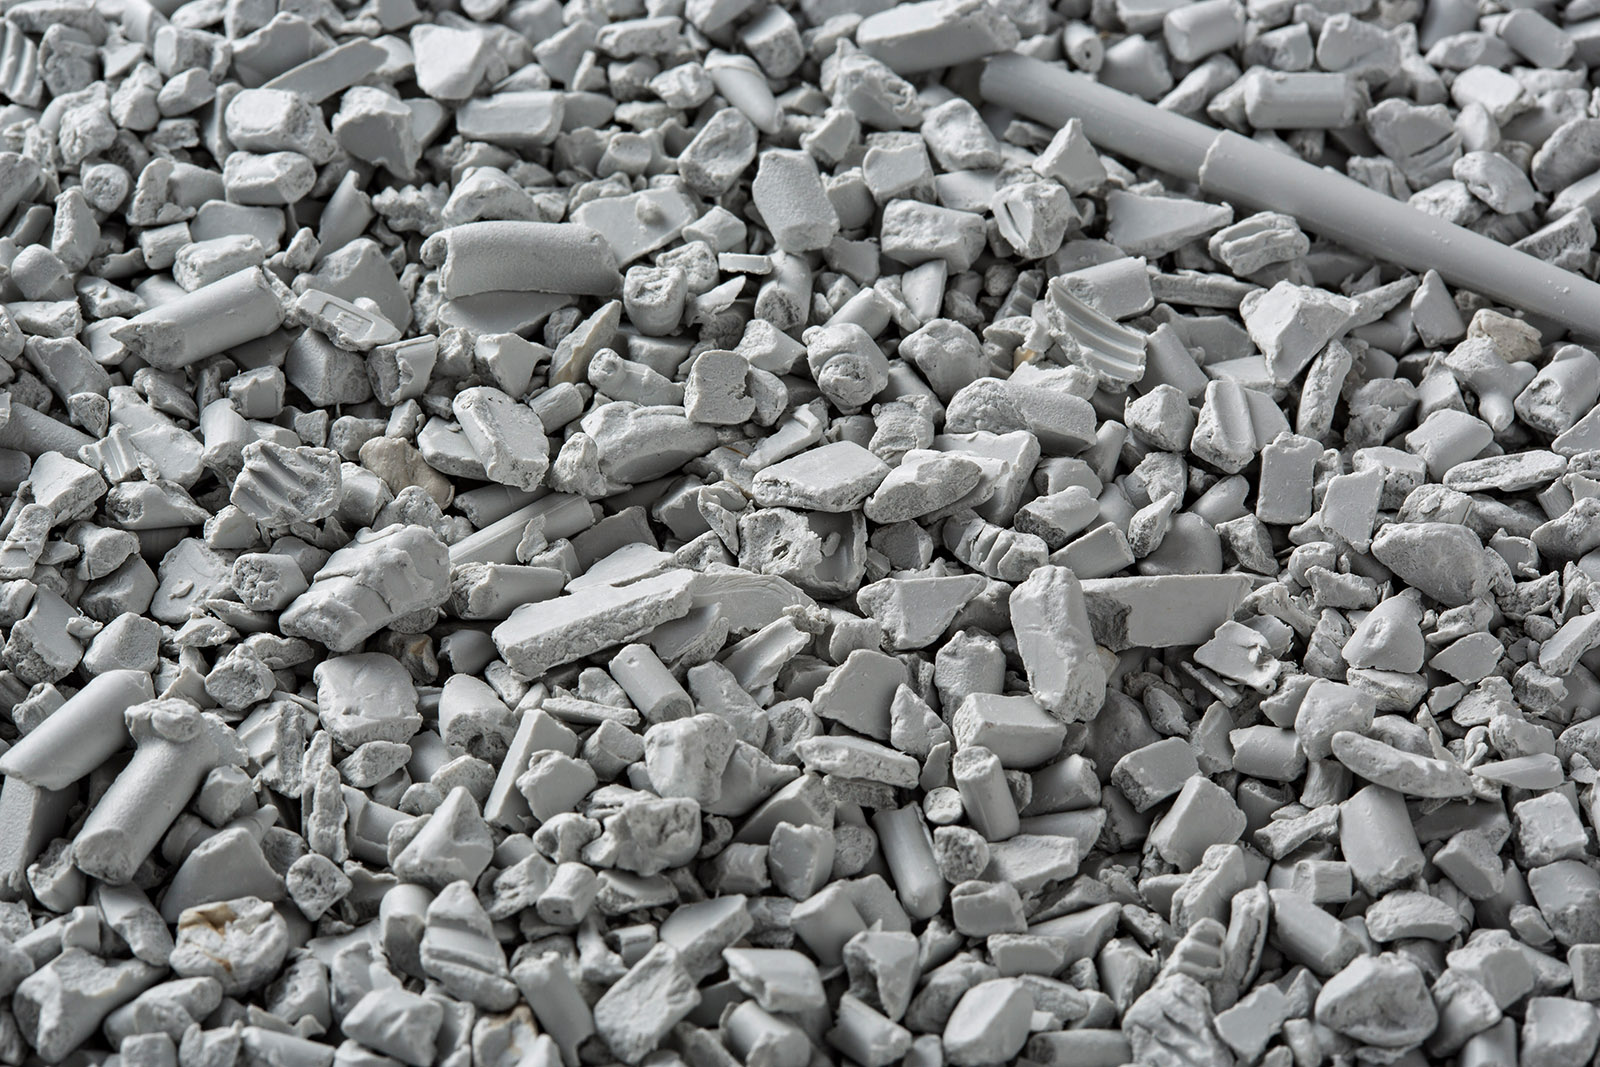 Plastic granulate from recycled plastic.